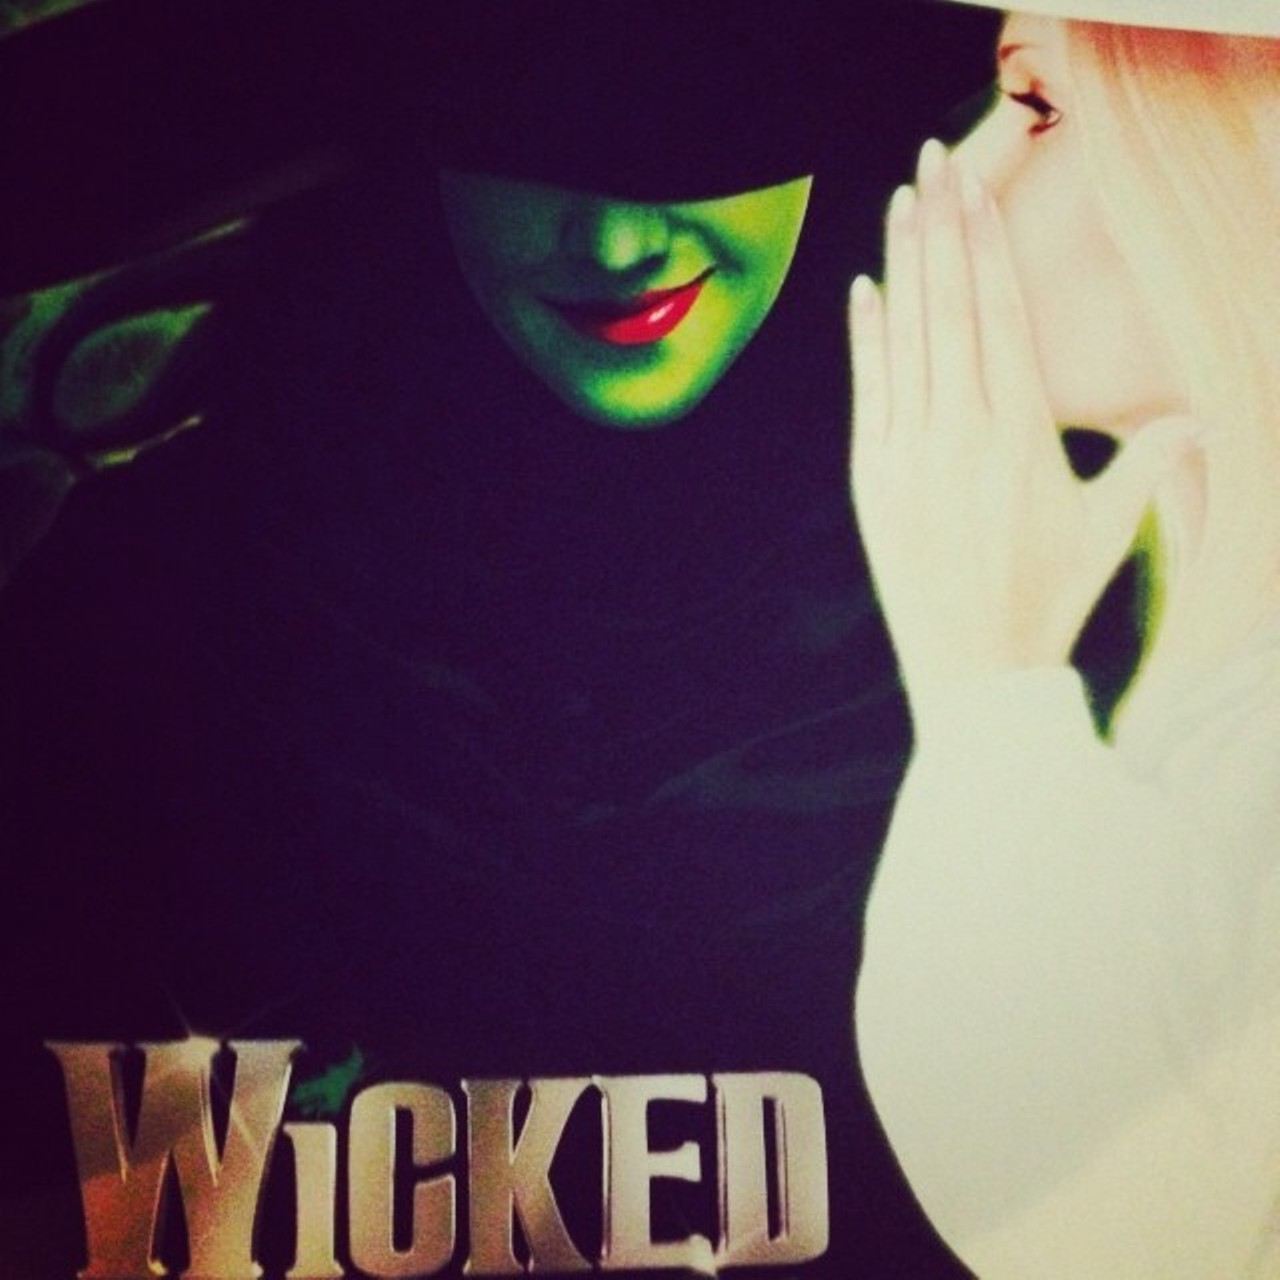 Wicked, the Broadway musical based on The Wizard of Oz, has been through town a few times in the past. Yet every time it comes back round, it puts up huge numbers. While it might seem better suited to Halloween, the play, which tells the story of how the Wicked Witch of the West came to develop her deep-seated hatred for Glenda the Good, appeals to the entire family. So with some free time for the holidays, why not take the entire brood to the State Theatre to check out the show? Today's show at 1 p.m. is your last chance to see the play. Tickets are $30 to $175. (Niesel) 1519 Euclid Ave., 216-241-6000, playhousesquare.org